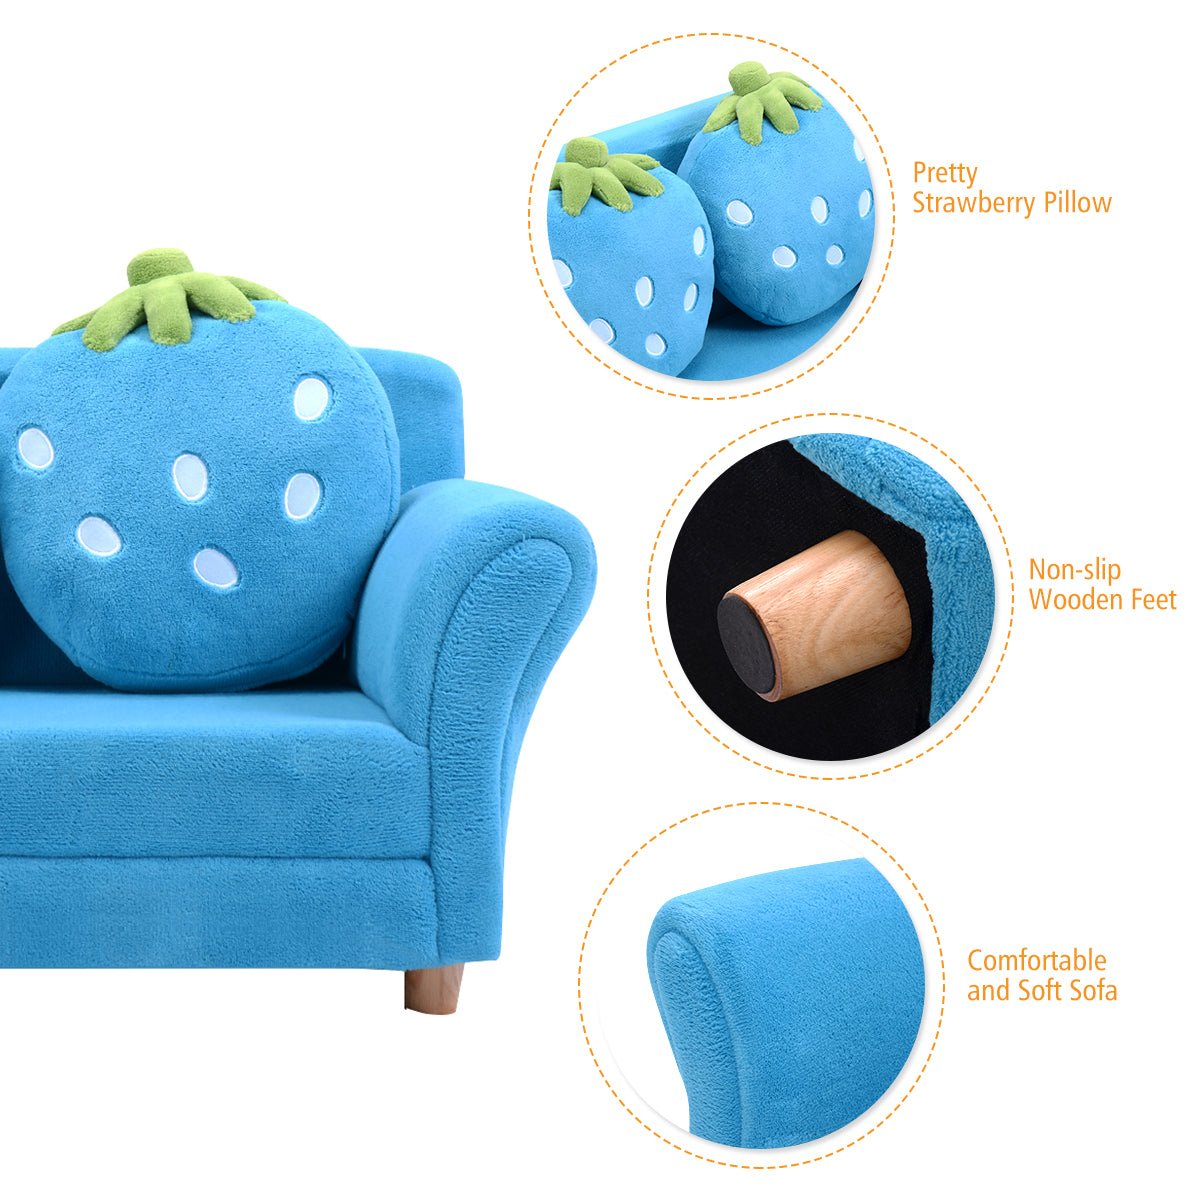 Children's 2-Seat Sofa Bed: Lounge with Charming Strawberry Pillows for Kids